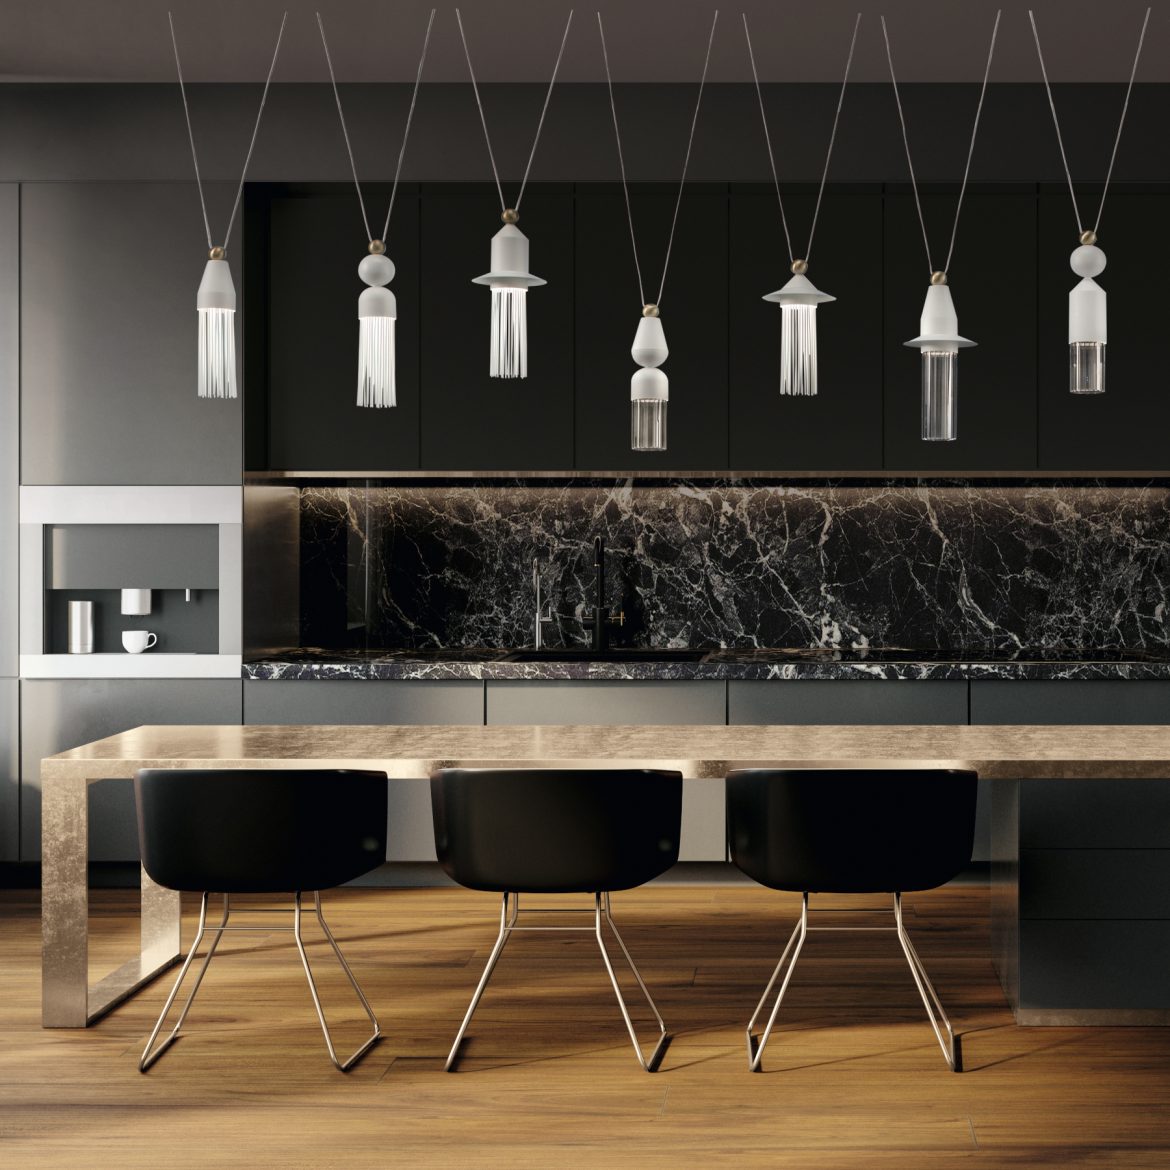 Light Up Your Dining Room and Kitchen: Choosing the Perfect Lighting Fixtures